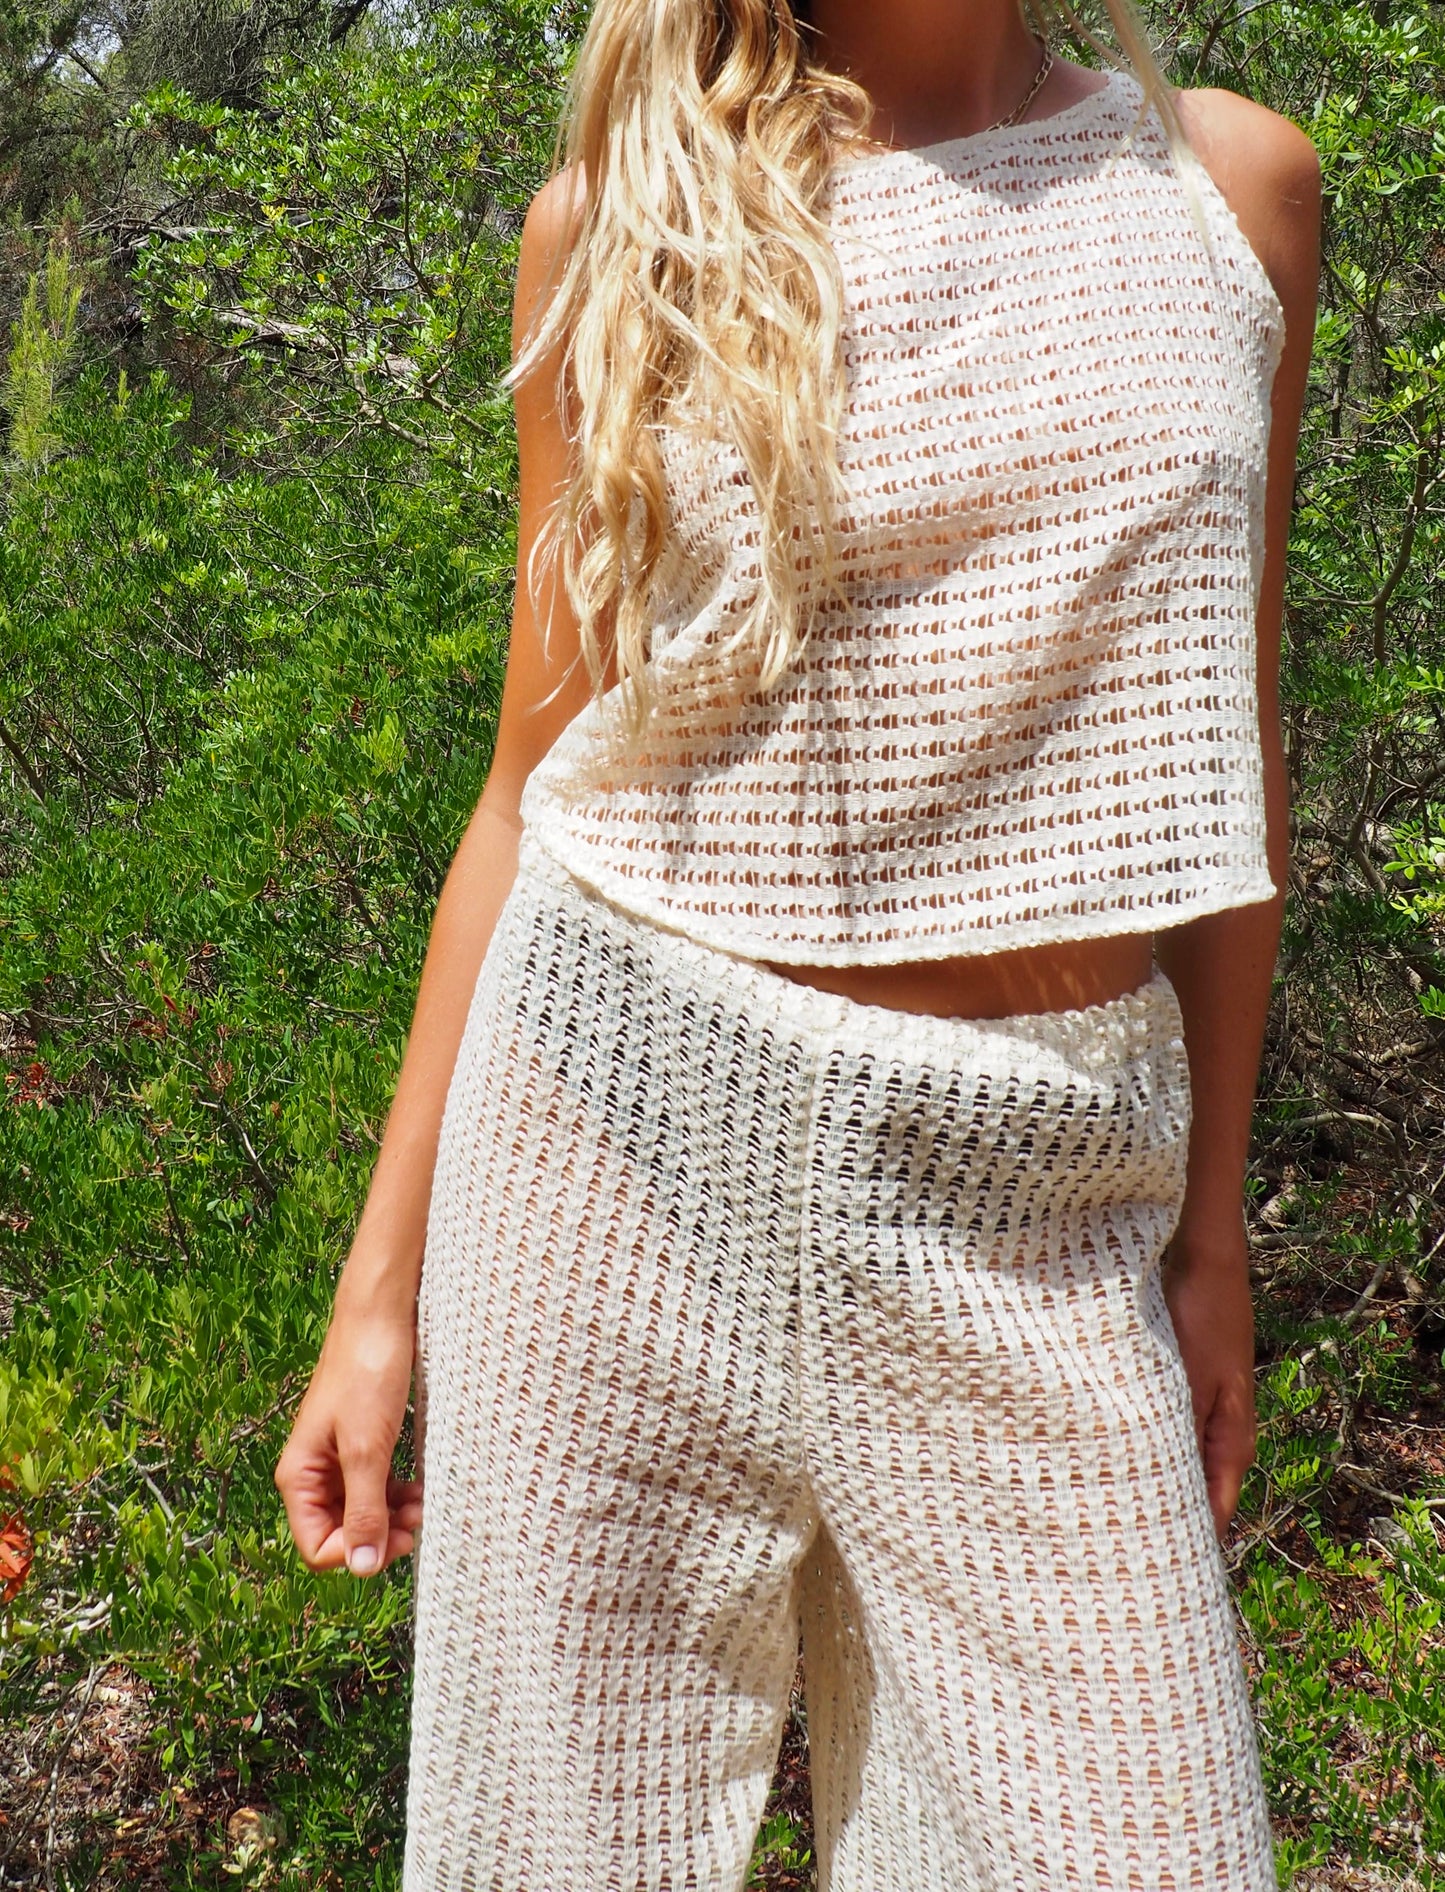 Up-cycled cream mesh woven shear crop top vest by Vagabond Ibiza